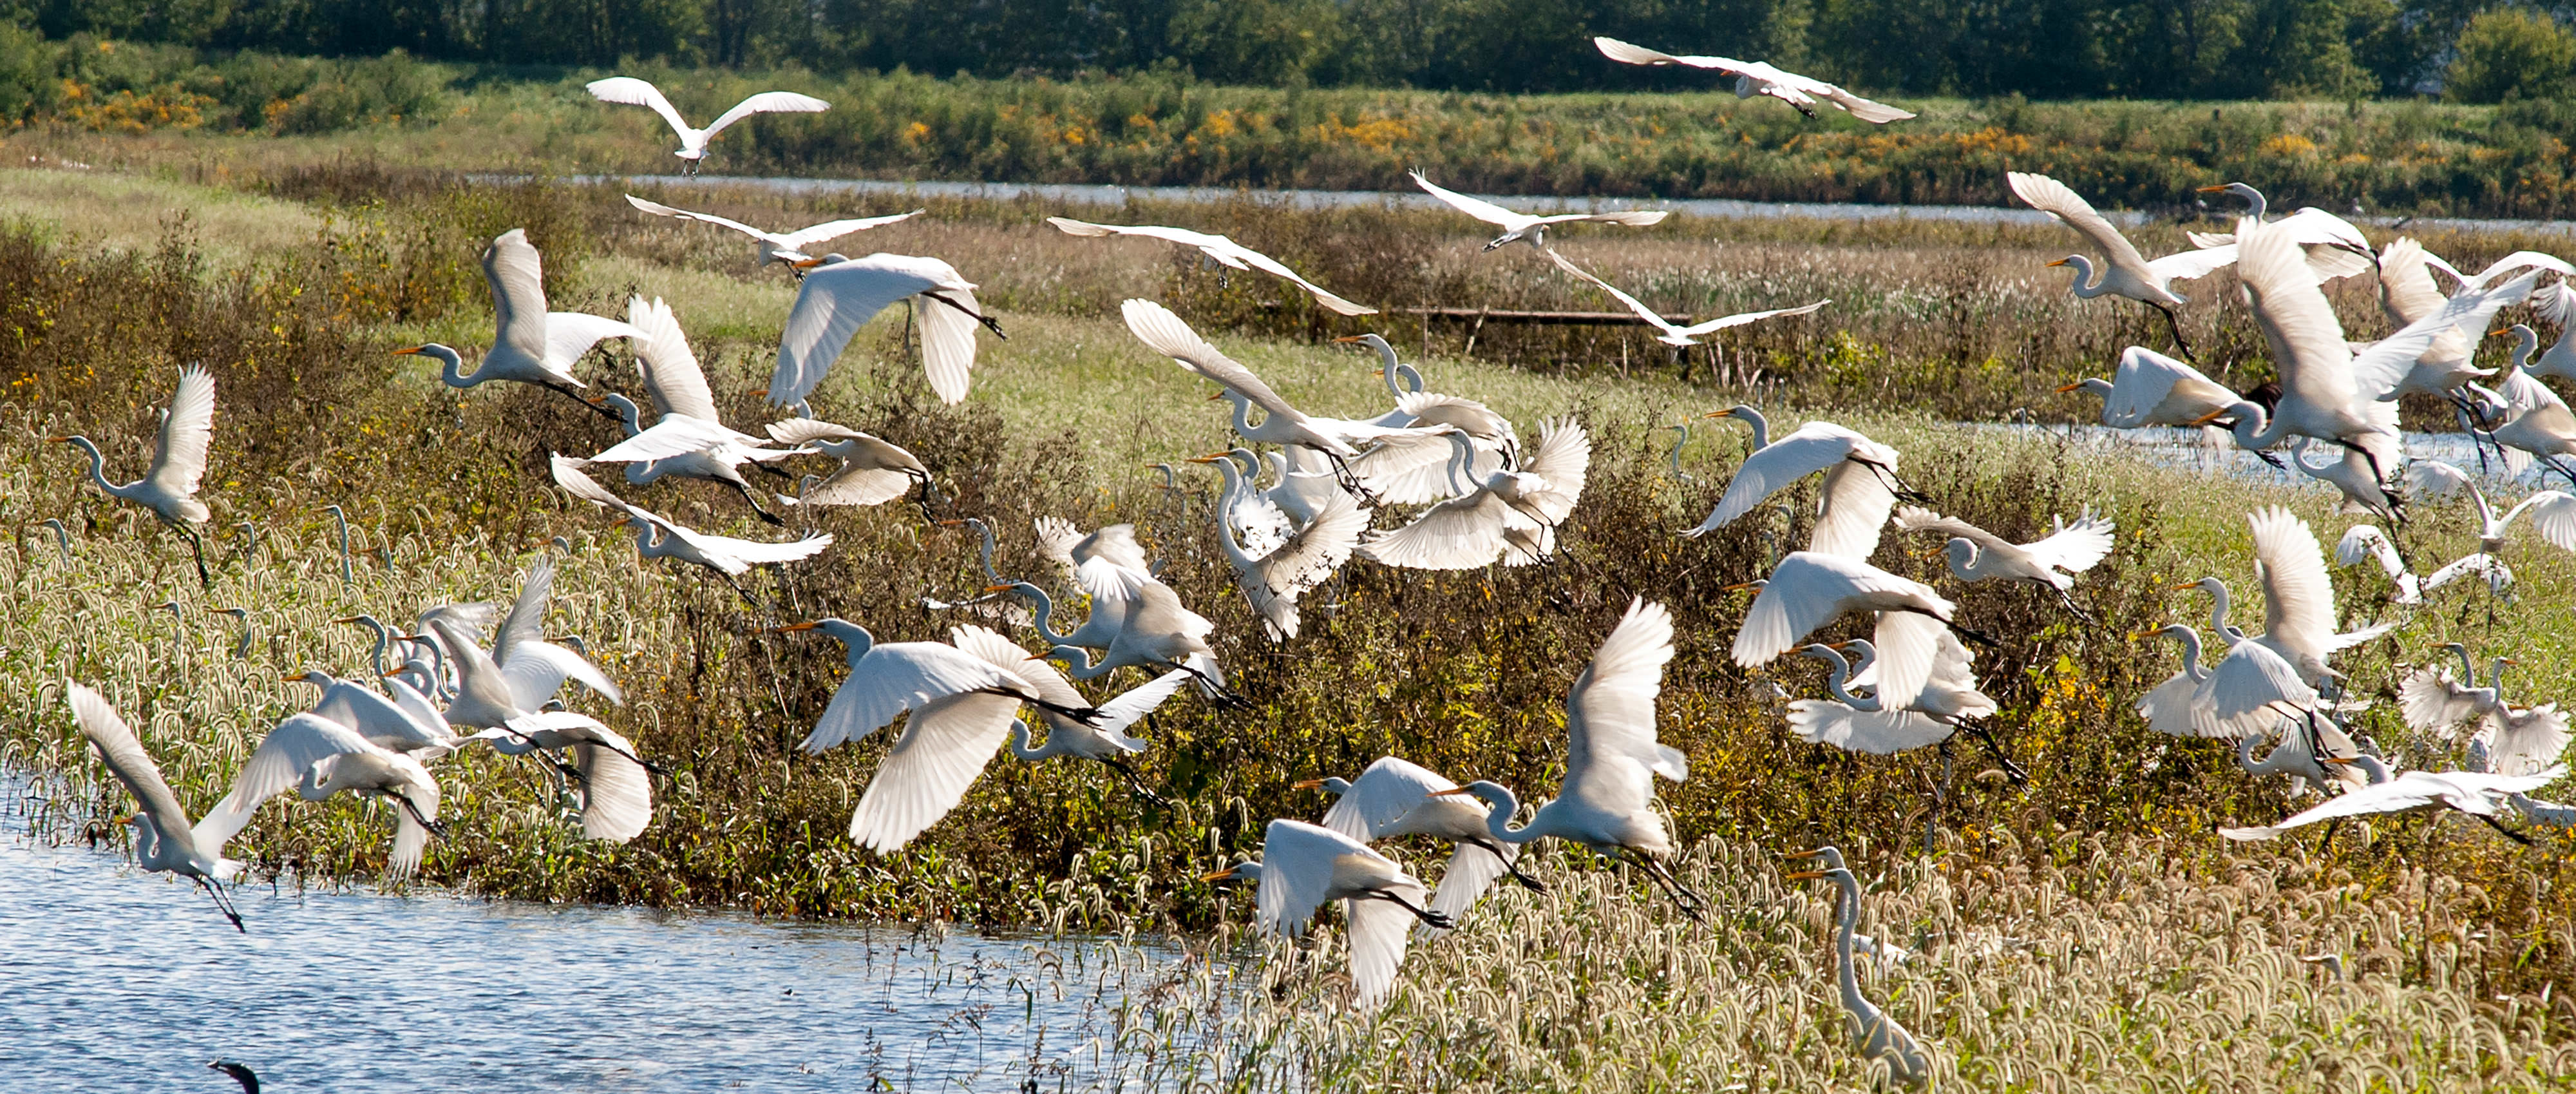 A flock of snow geese in flight over a wetland.